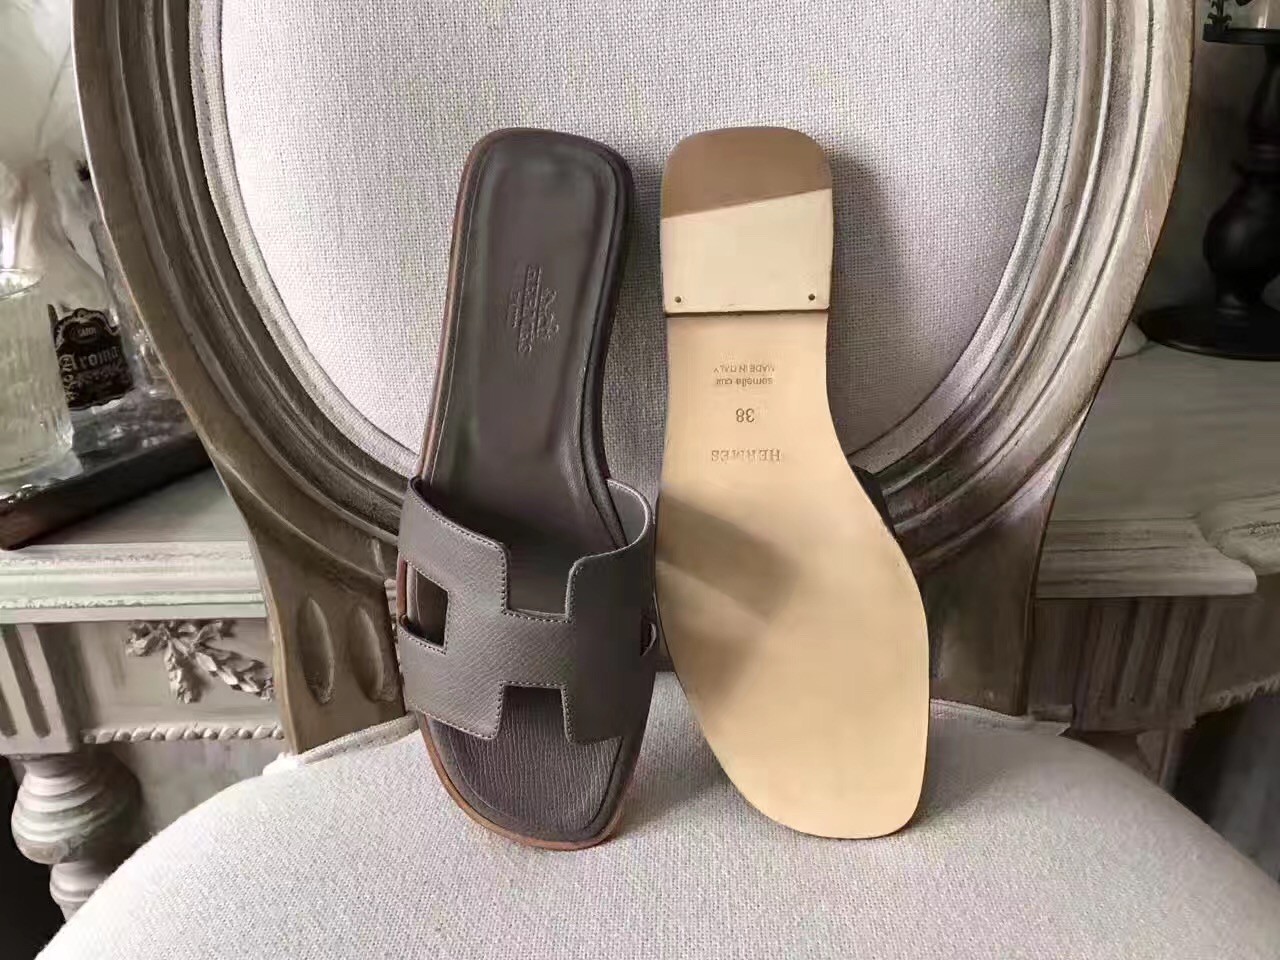 Hermes Oran Sandals In Etoupe Epsom Leather QY01985 | Hermes Shoes